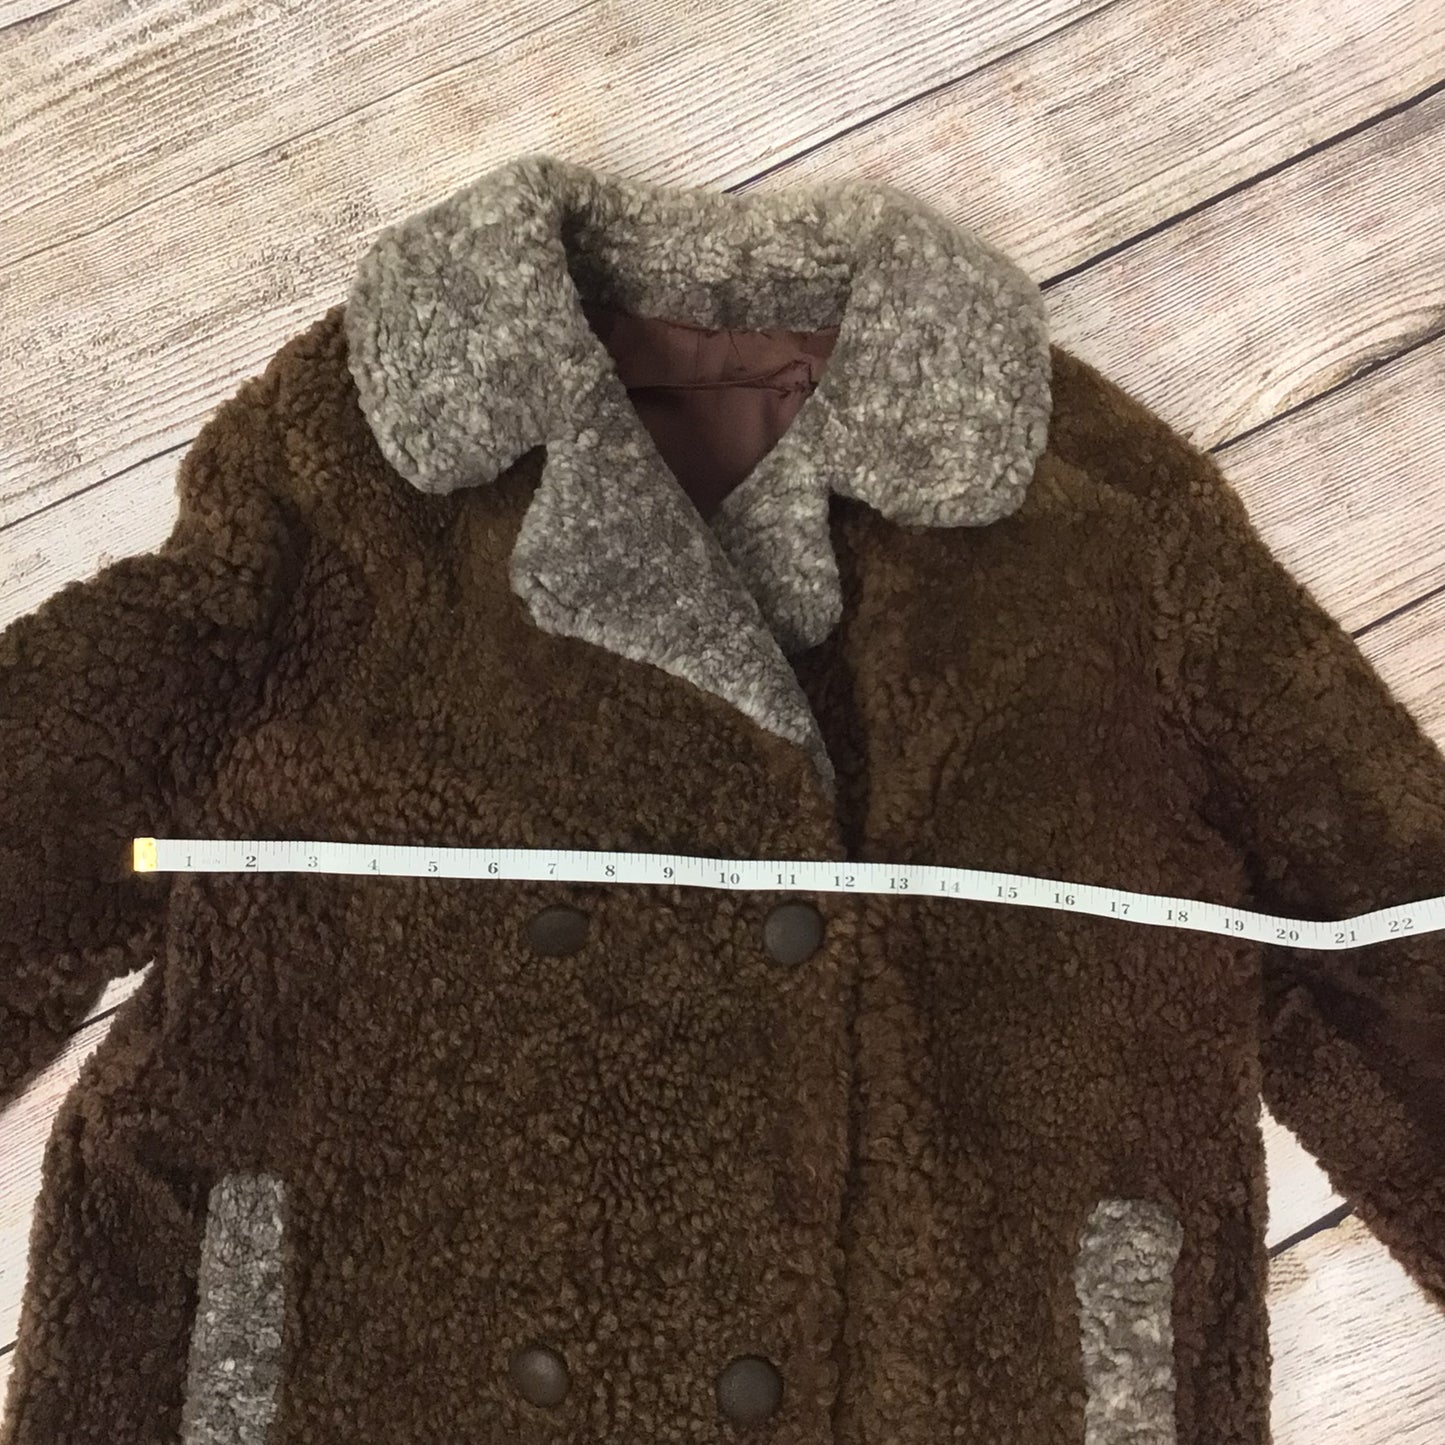 Vintage Woolly Teddy Bear Brown & Grey Coat Size S (approx.)